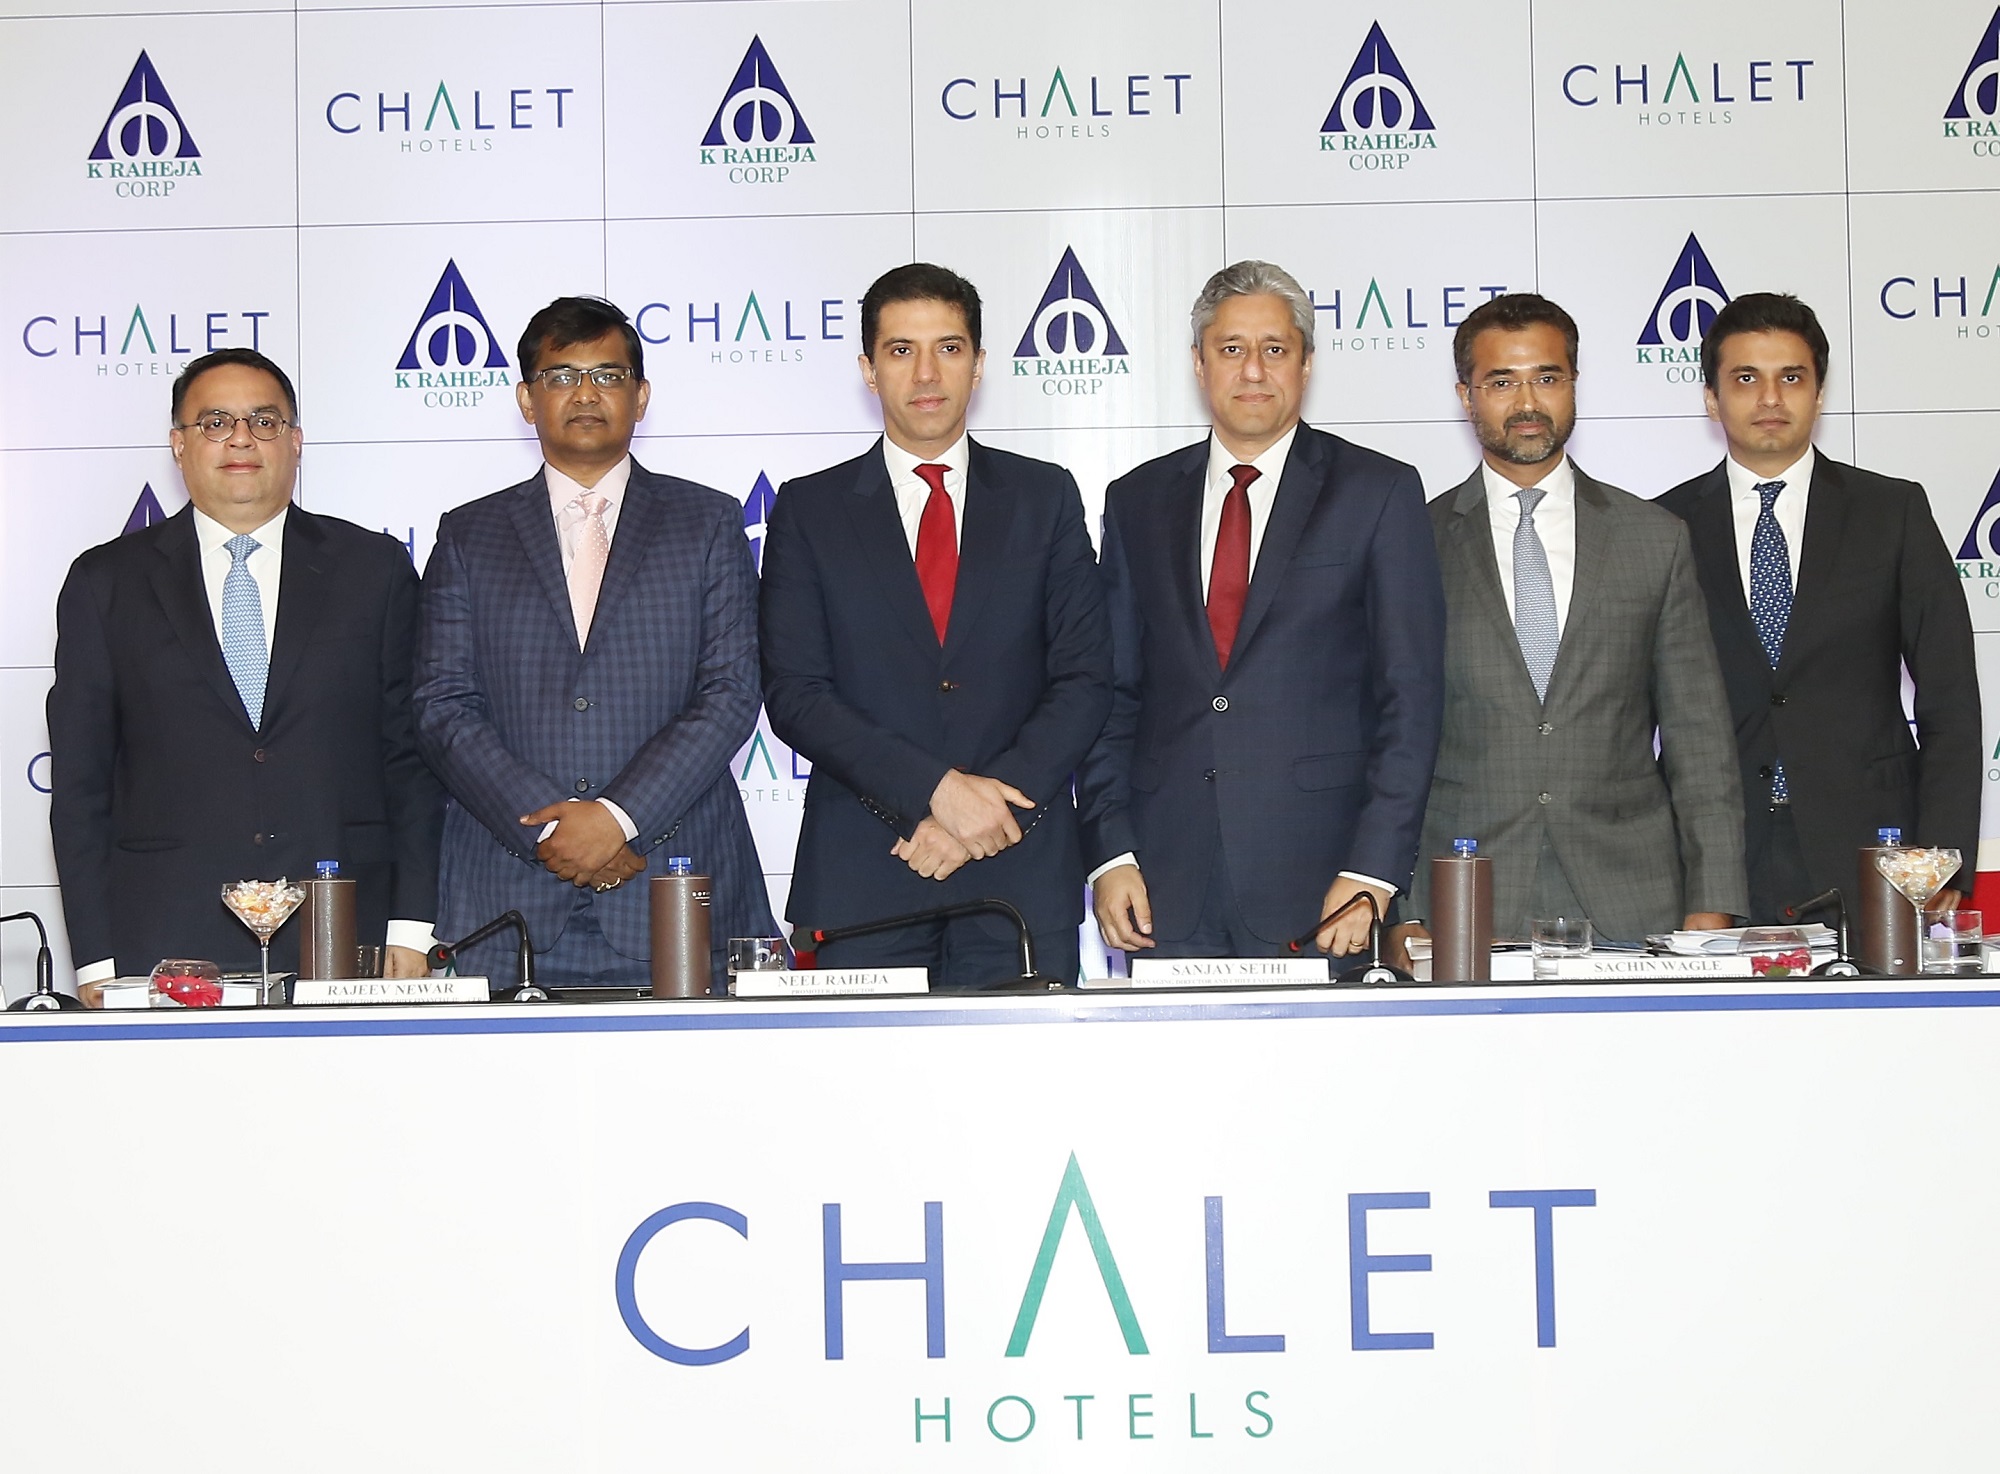 (L-R): Mr. Atul Mehra (JM Financial Limited), Mr. Rajeev Newar (Executive Director and Chief Financial Officer, Chalet Hotels Limited), Mr. Neel Raheja (Promoter & Director, Chalet Hotels Limited), Mr. Sanjay Sethi (Managing Director and Chief Executive Officer, Chalet Hotels Limited), Mr. Sachin Wagle (Morgan Stanley India Company Private Limited) and Mr. Chirag Negandhi (Axis Capital Limited) at the announcement of Chalet Hotels Limited IPO.- Photo By Sachin Murdeshwar GPN News Network 